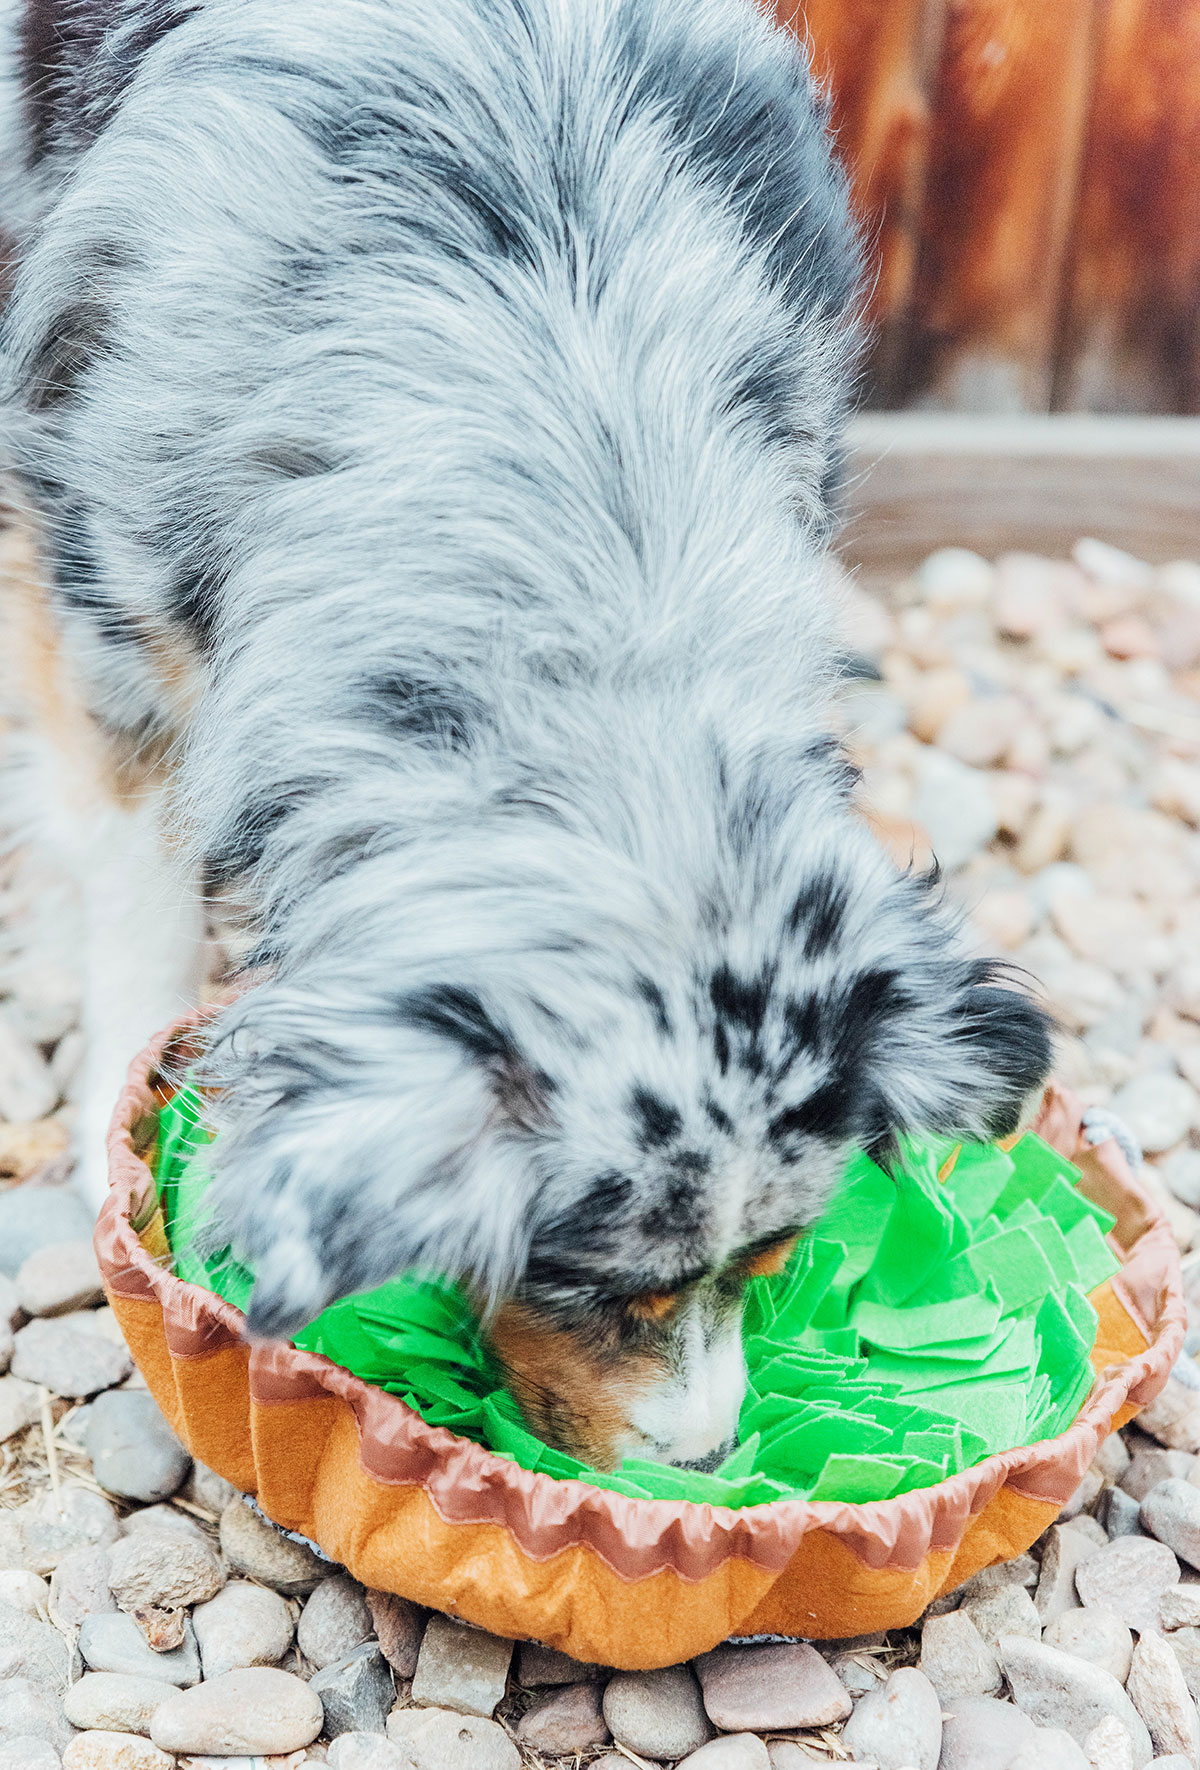 A dog digging for a treat in a snuffle mat